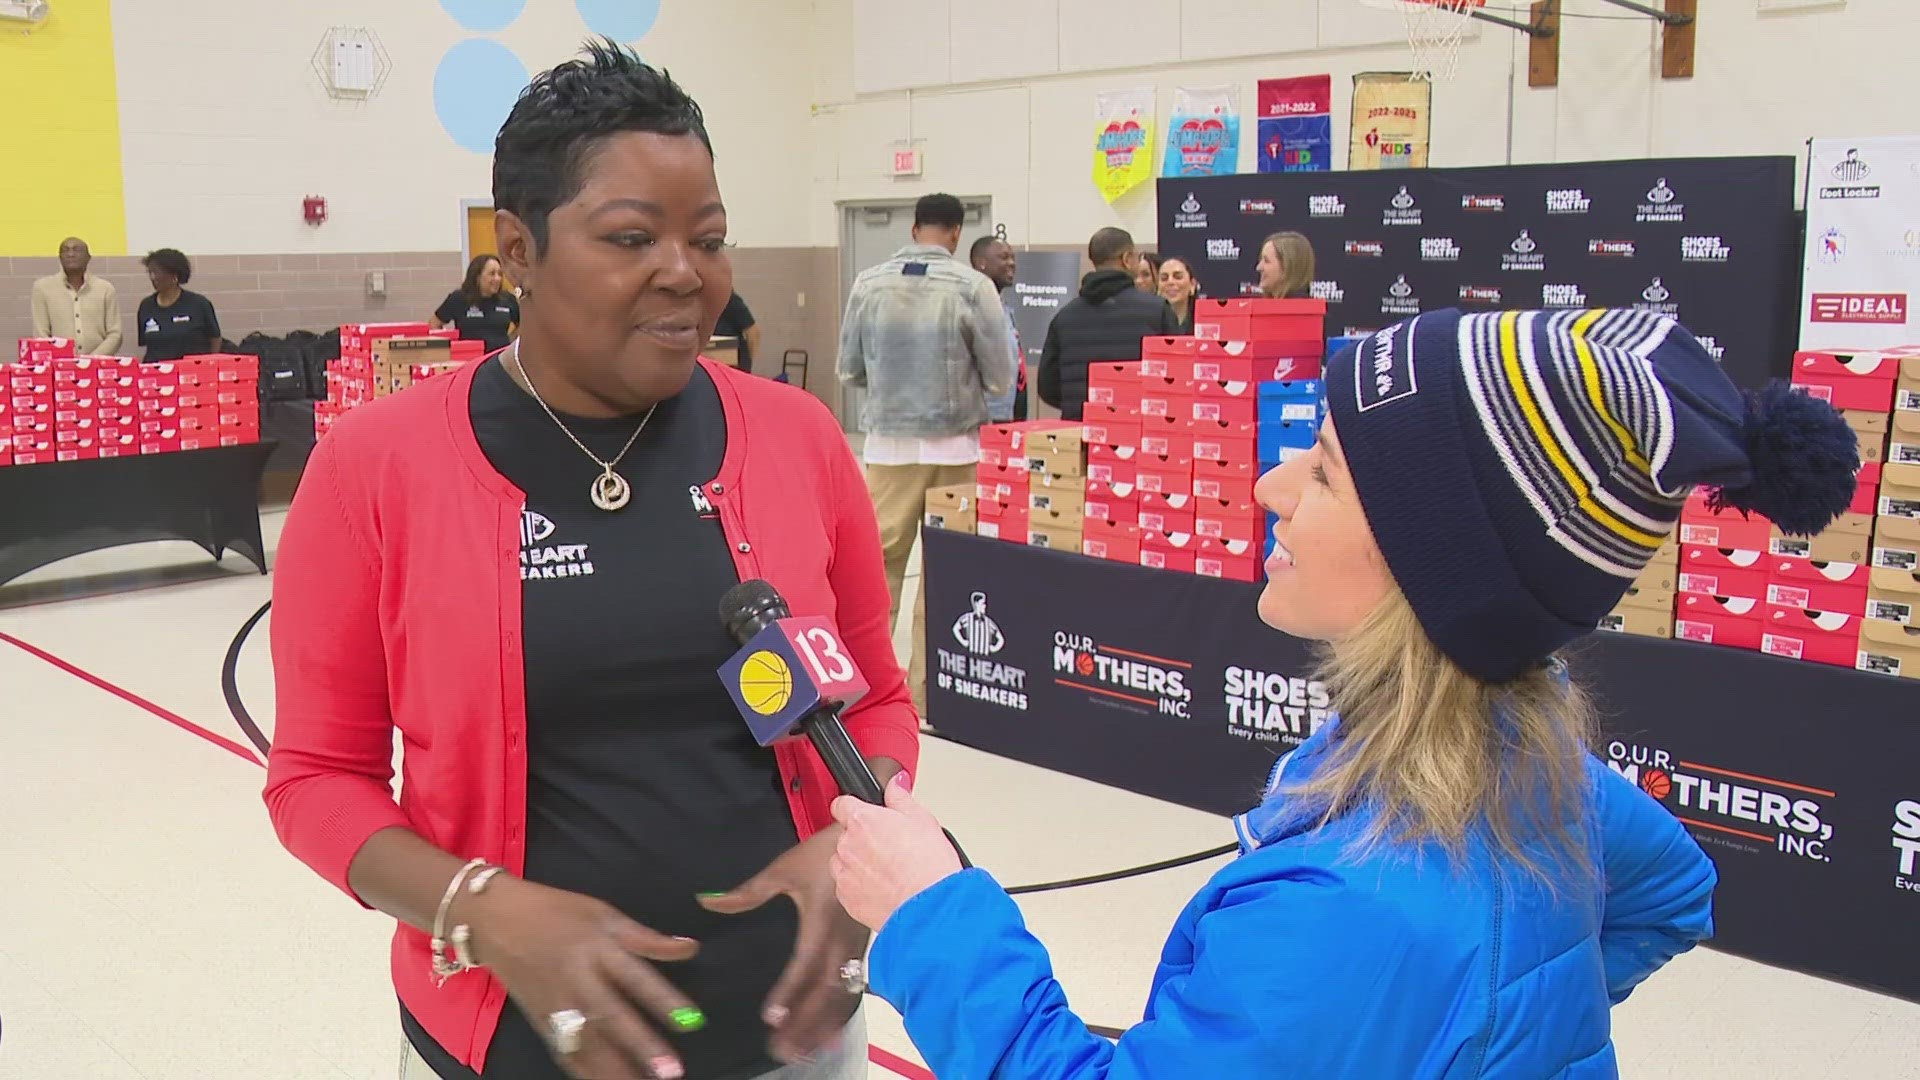 Wanda Durant and Malik Beasley's mom are a part of the O.U.R. Mothers foundation. They're teaming up with nonprofit "Shoes That Fit" and Footlocker.